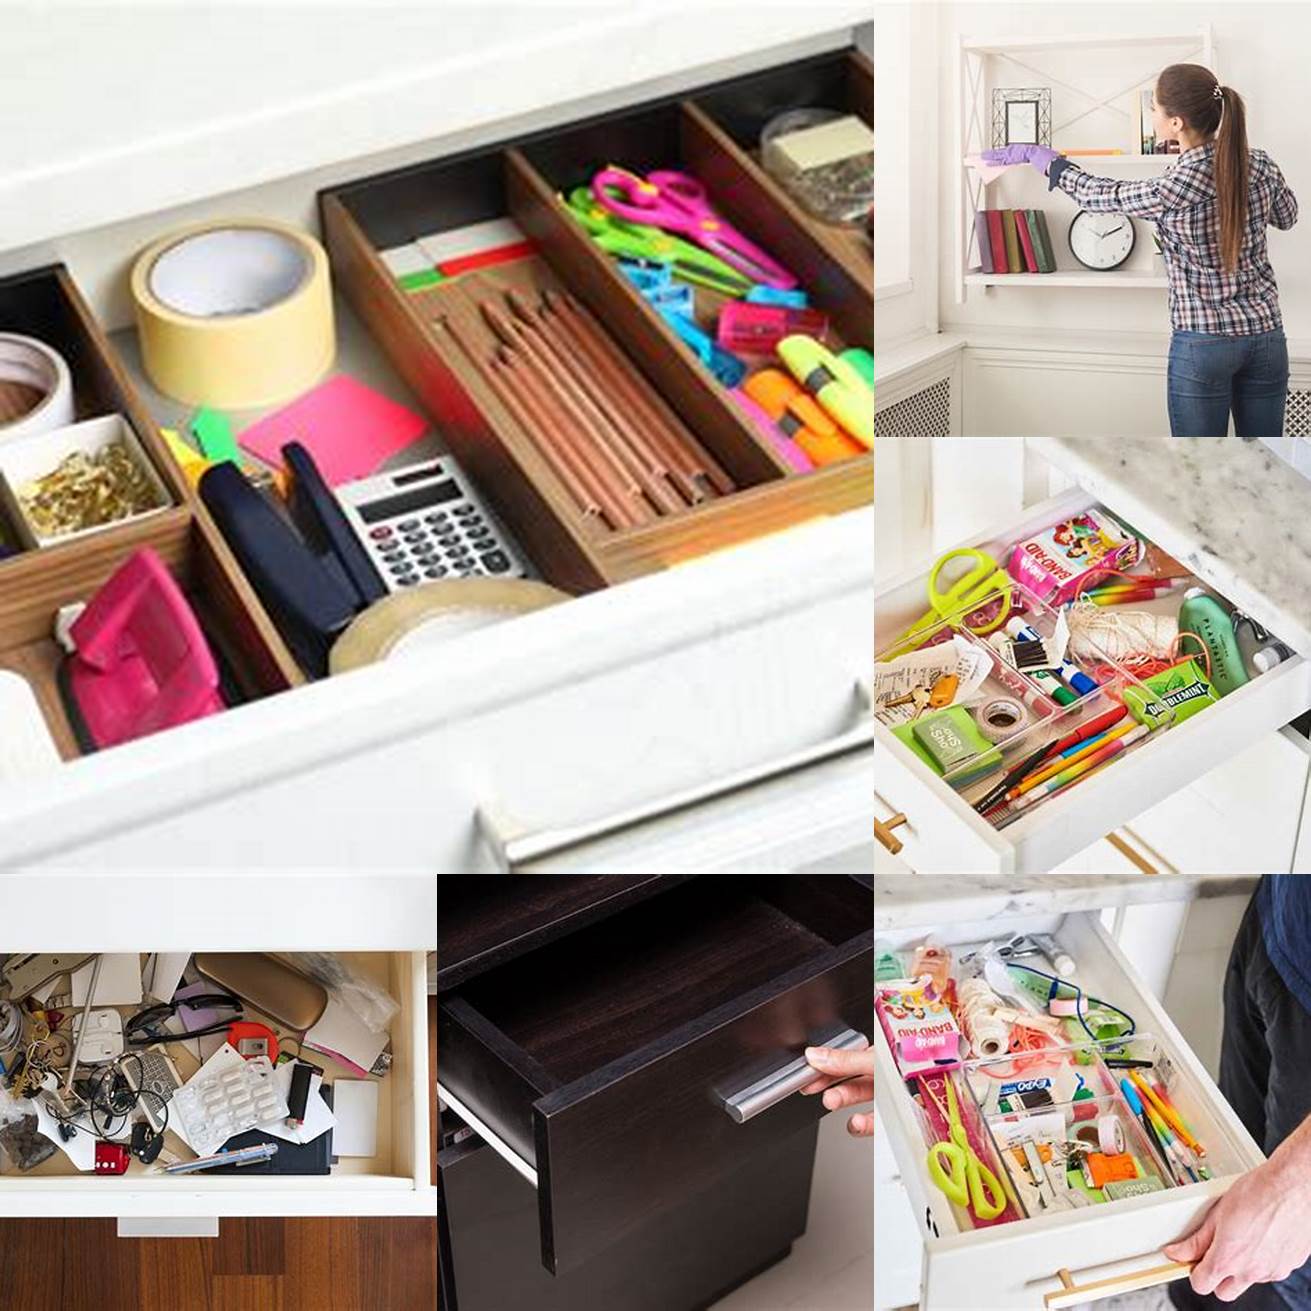 Clean your drawers regularly